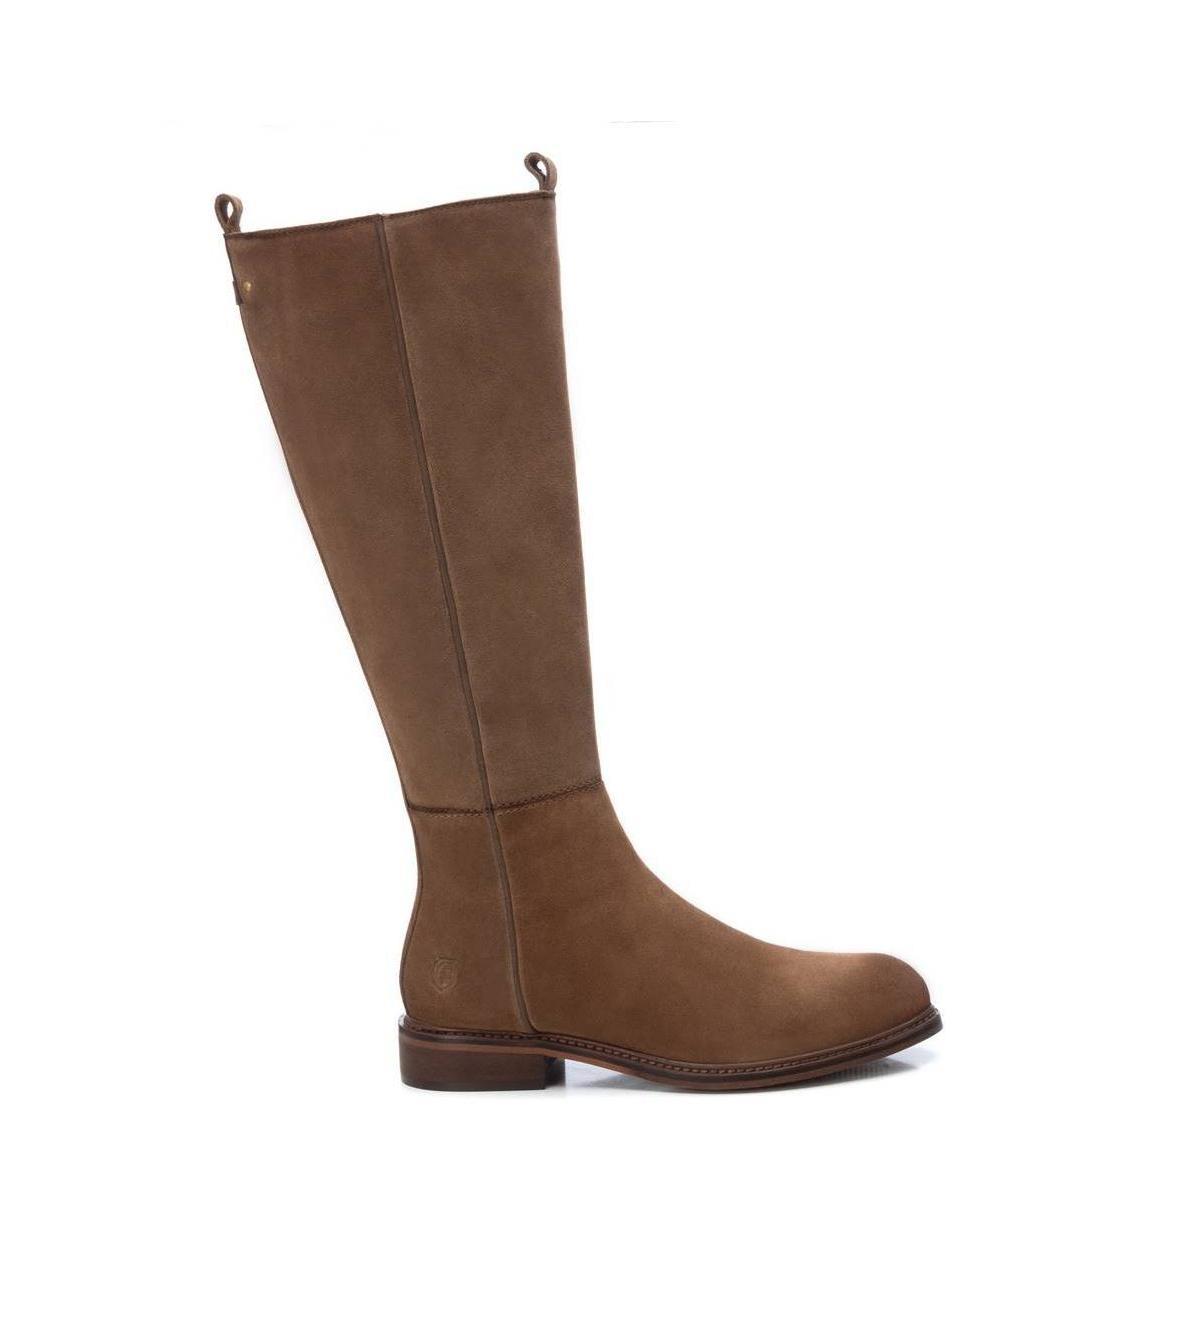 Womens Suede Boots By Xti Product Image